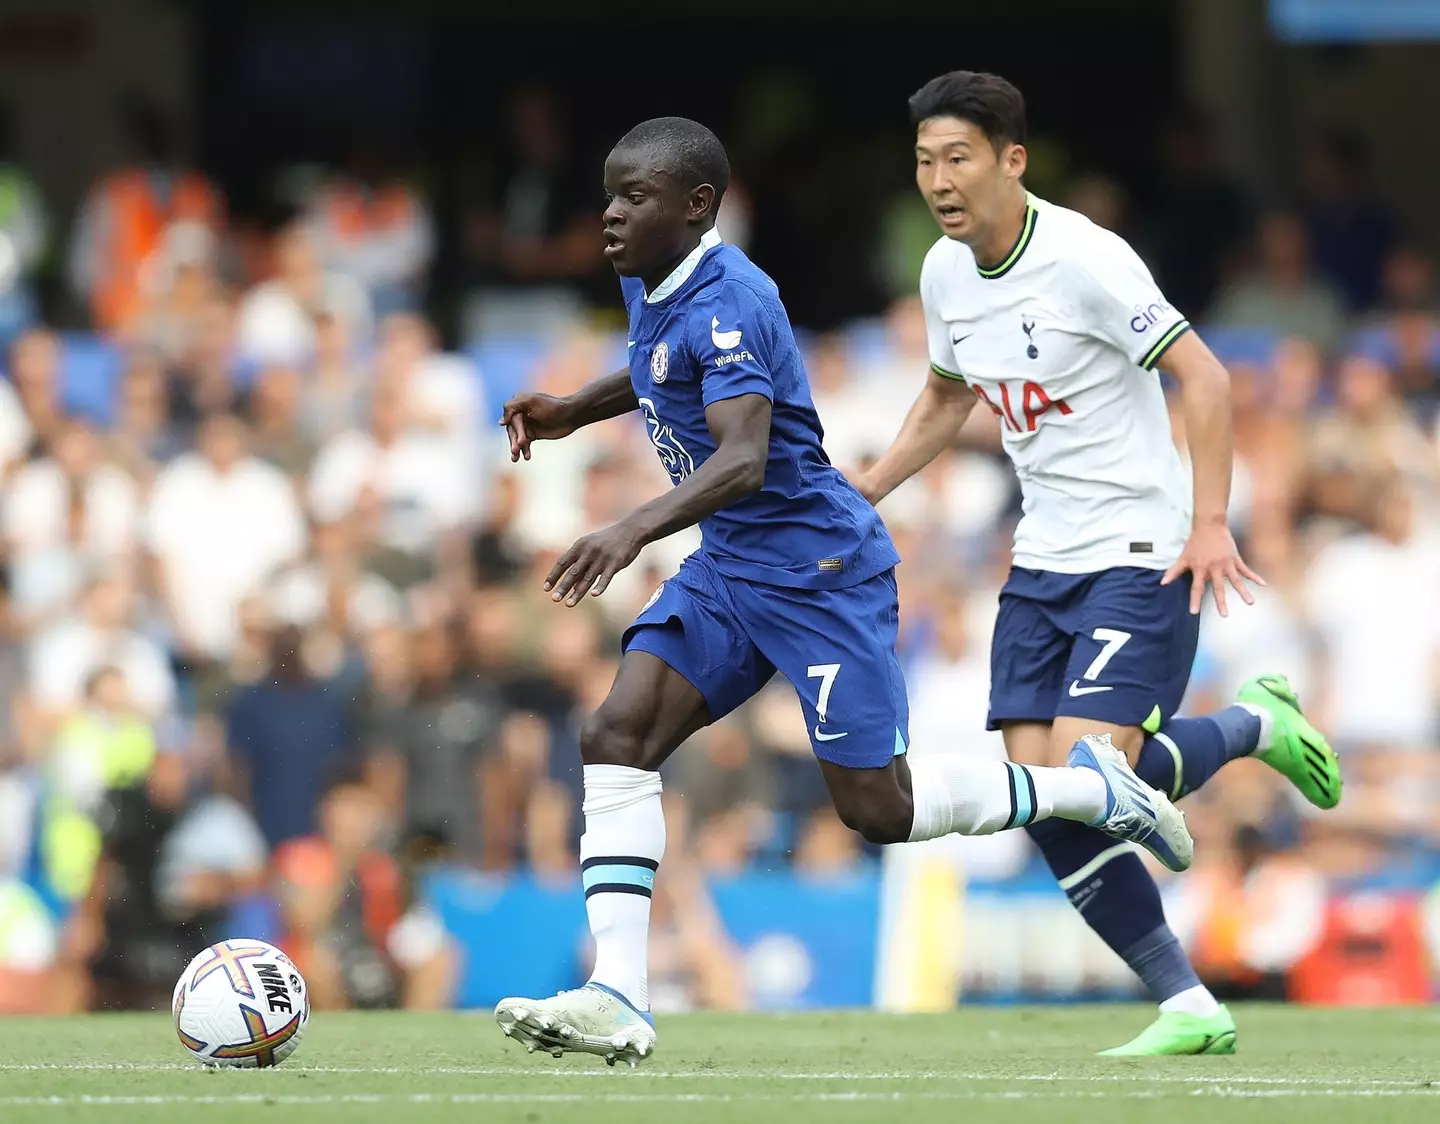 N'Golo Kanté Of Chelsea and Son Heung-Min of Tottenham Hotspur during the Premier League match at Stamford Bridge, London. (Alamy)